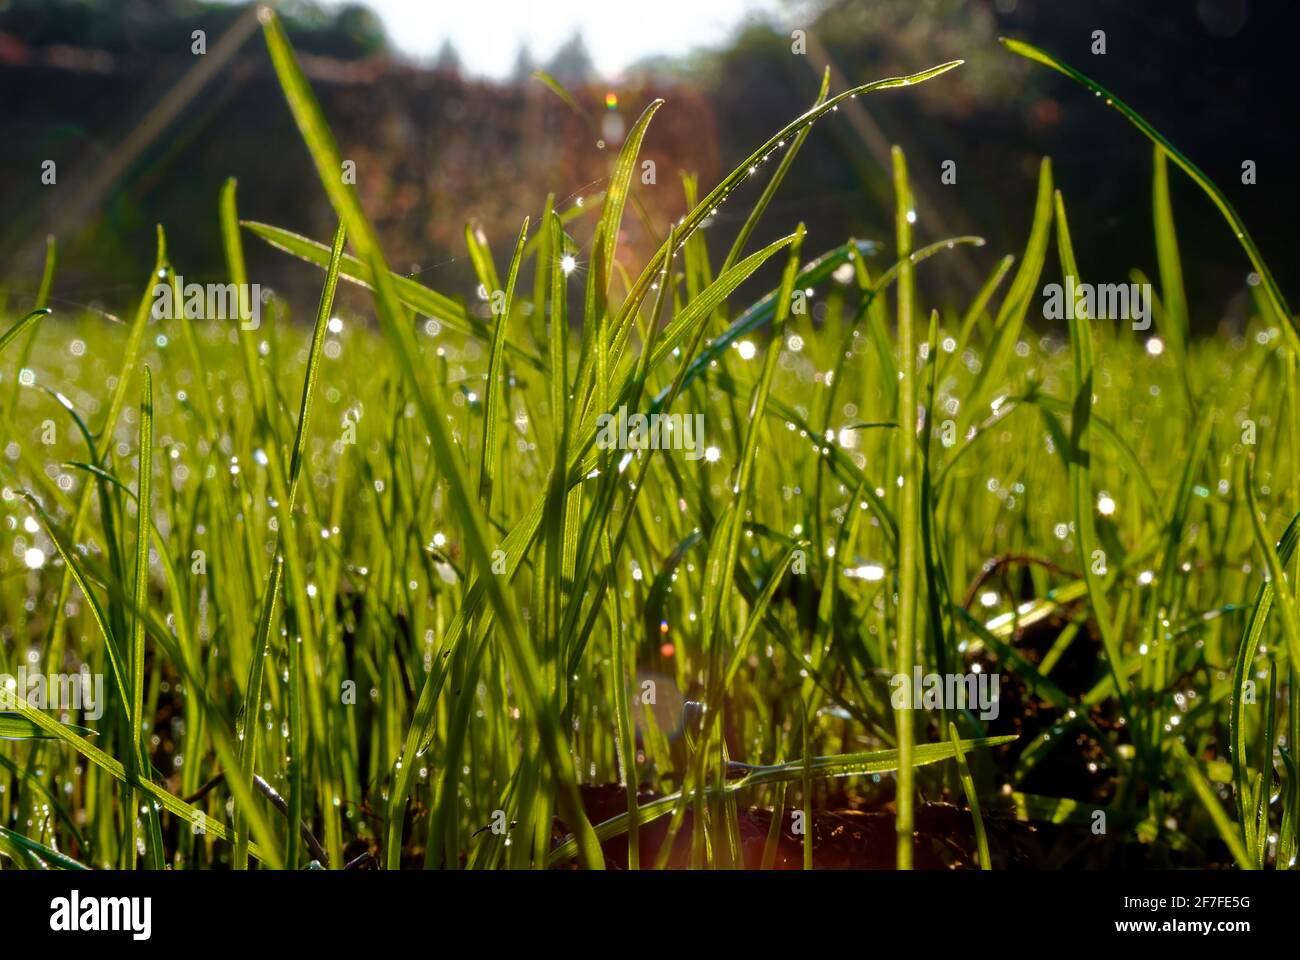 Forest clearing in the sun. Grass in the morning dew in the sun. Stock Photo